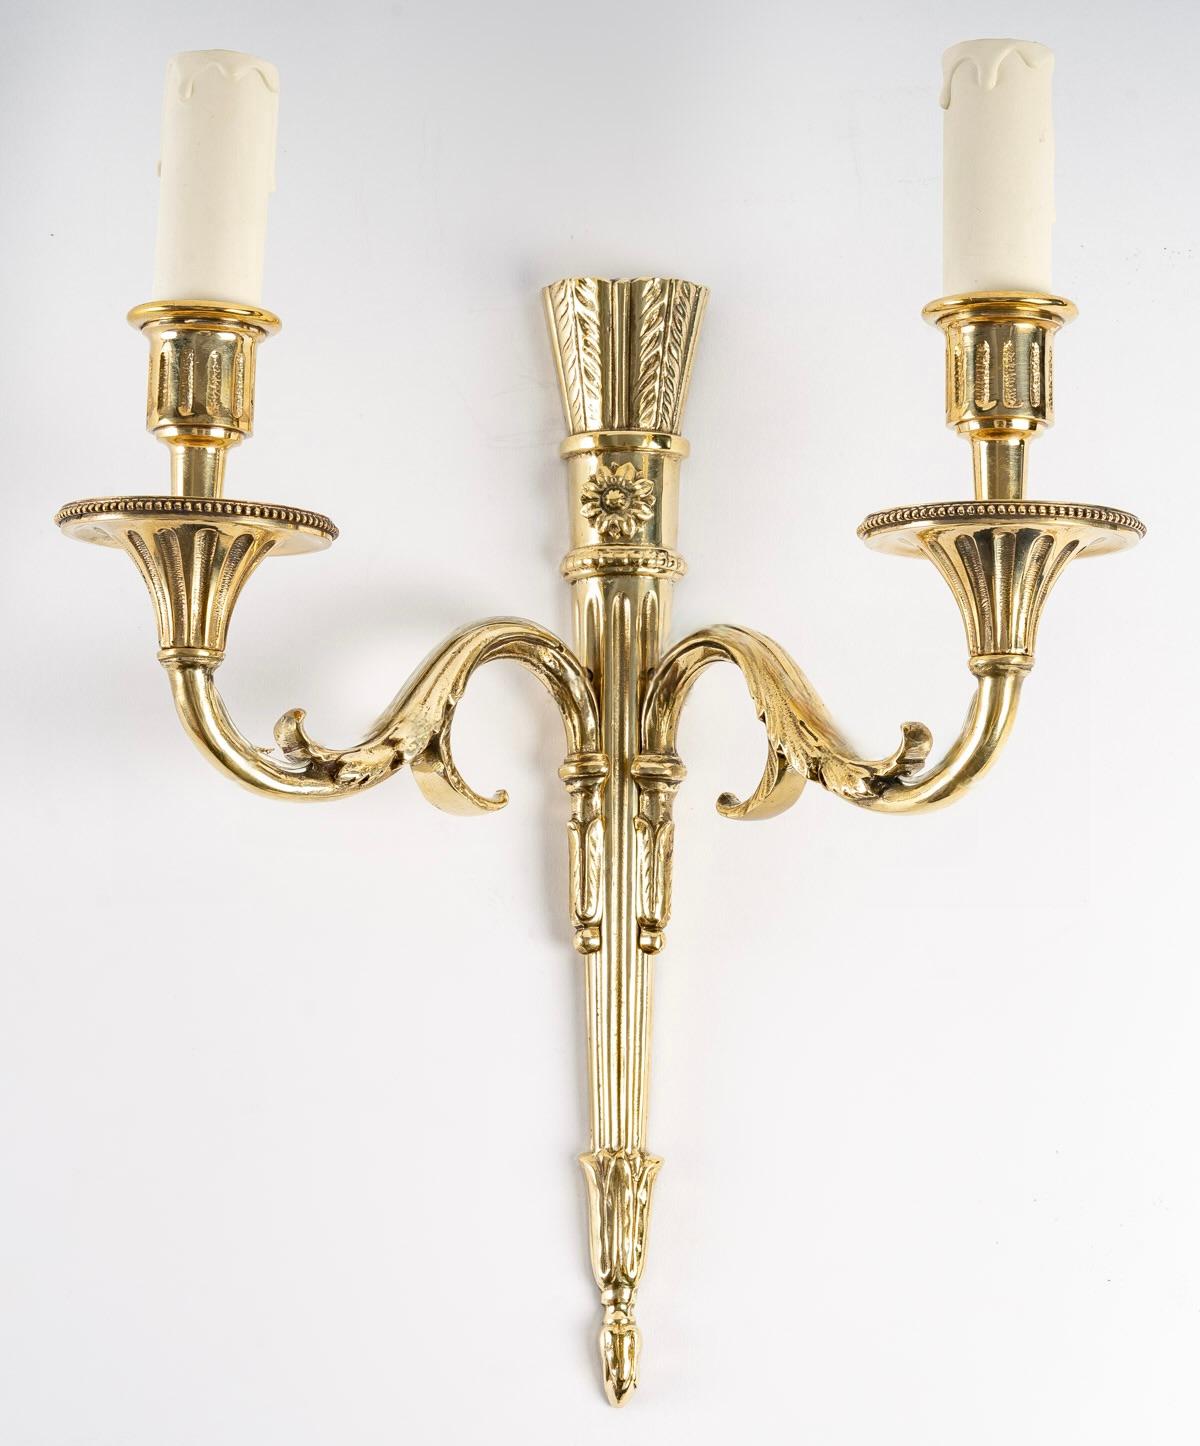 1950 Pair of Neoclassical Sconces in Bronze from the House of Lucien Gau For Sale 1